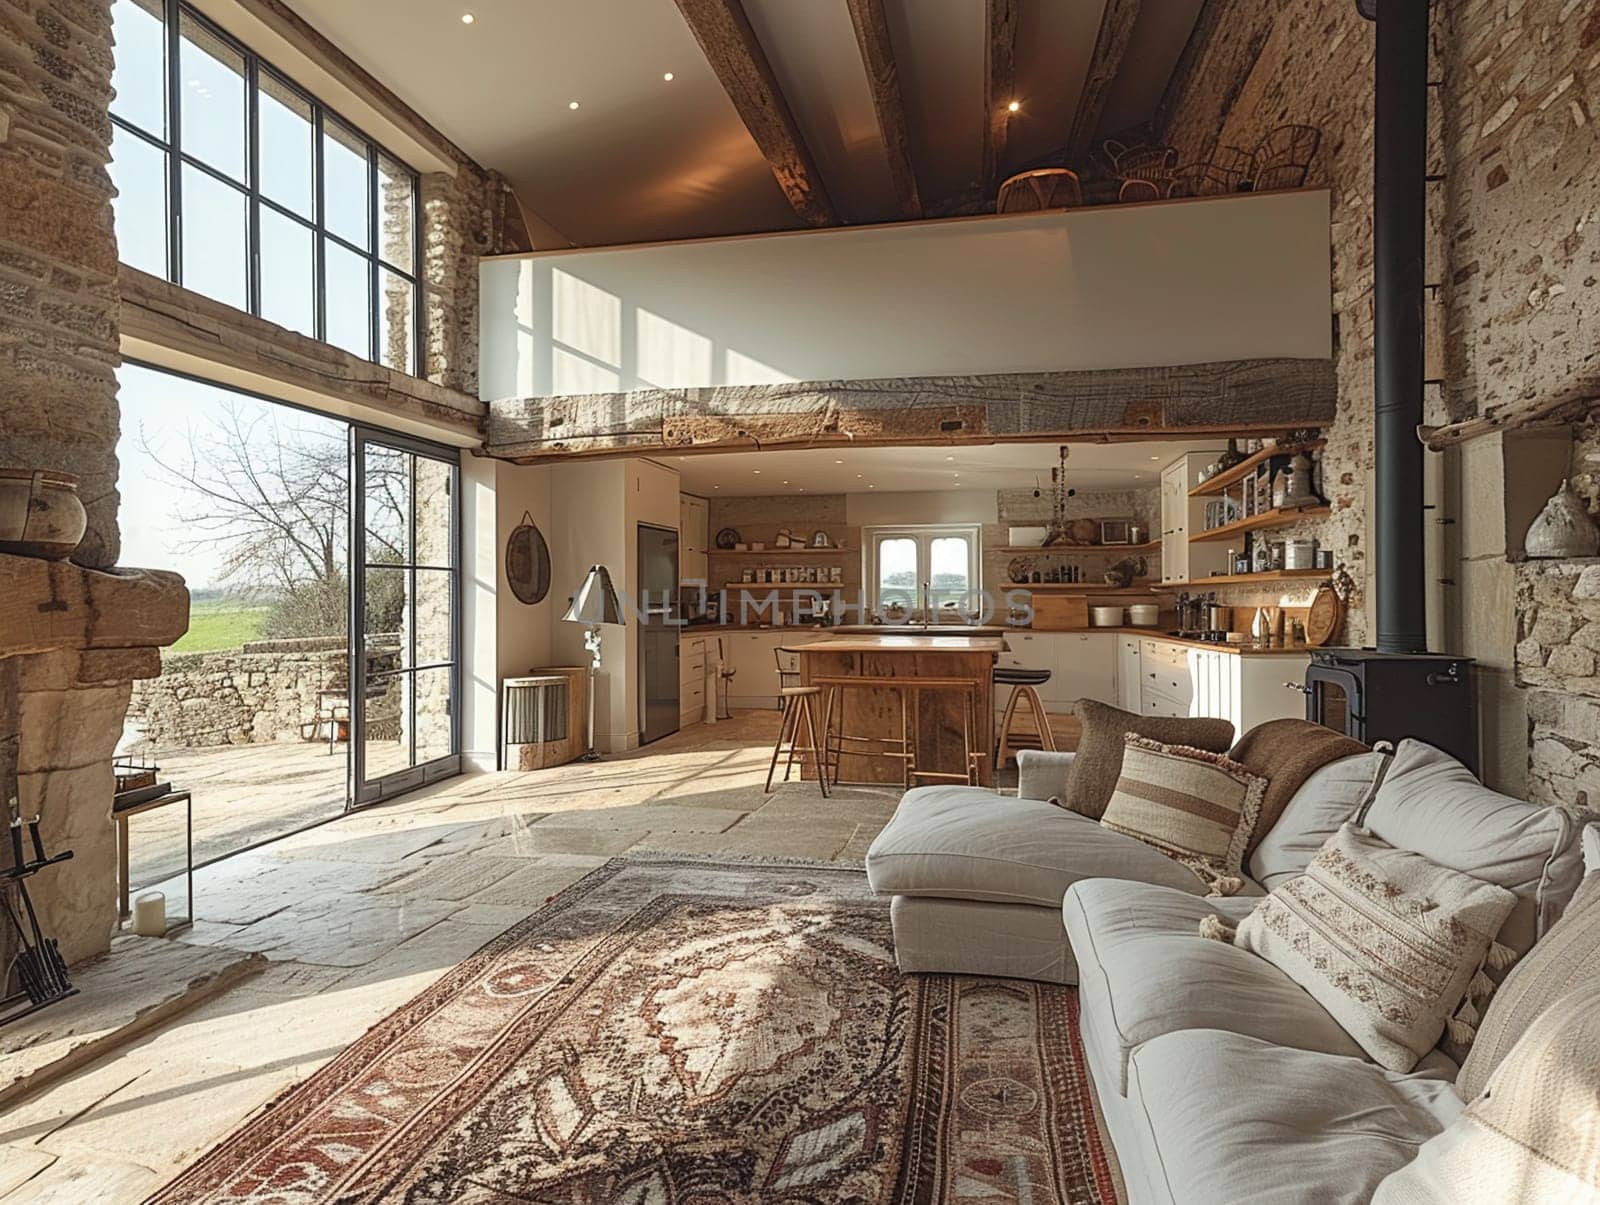 Rustic barn conversion with exposed beams and modern touches by Benzoix